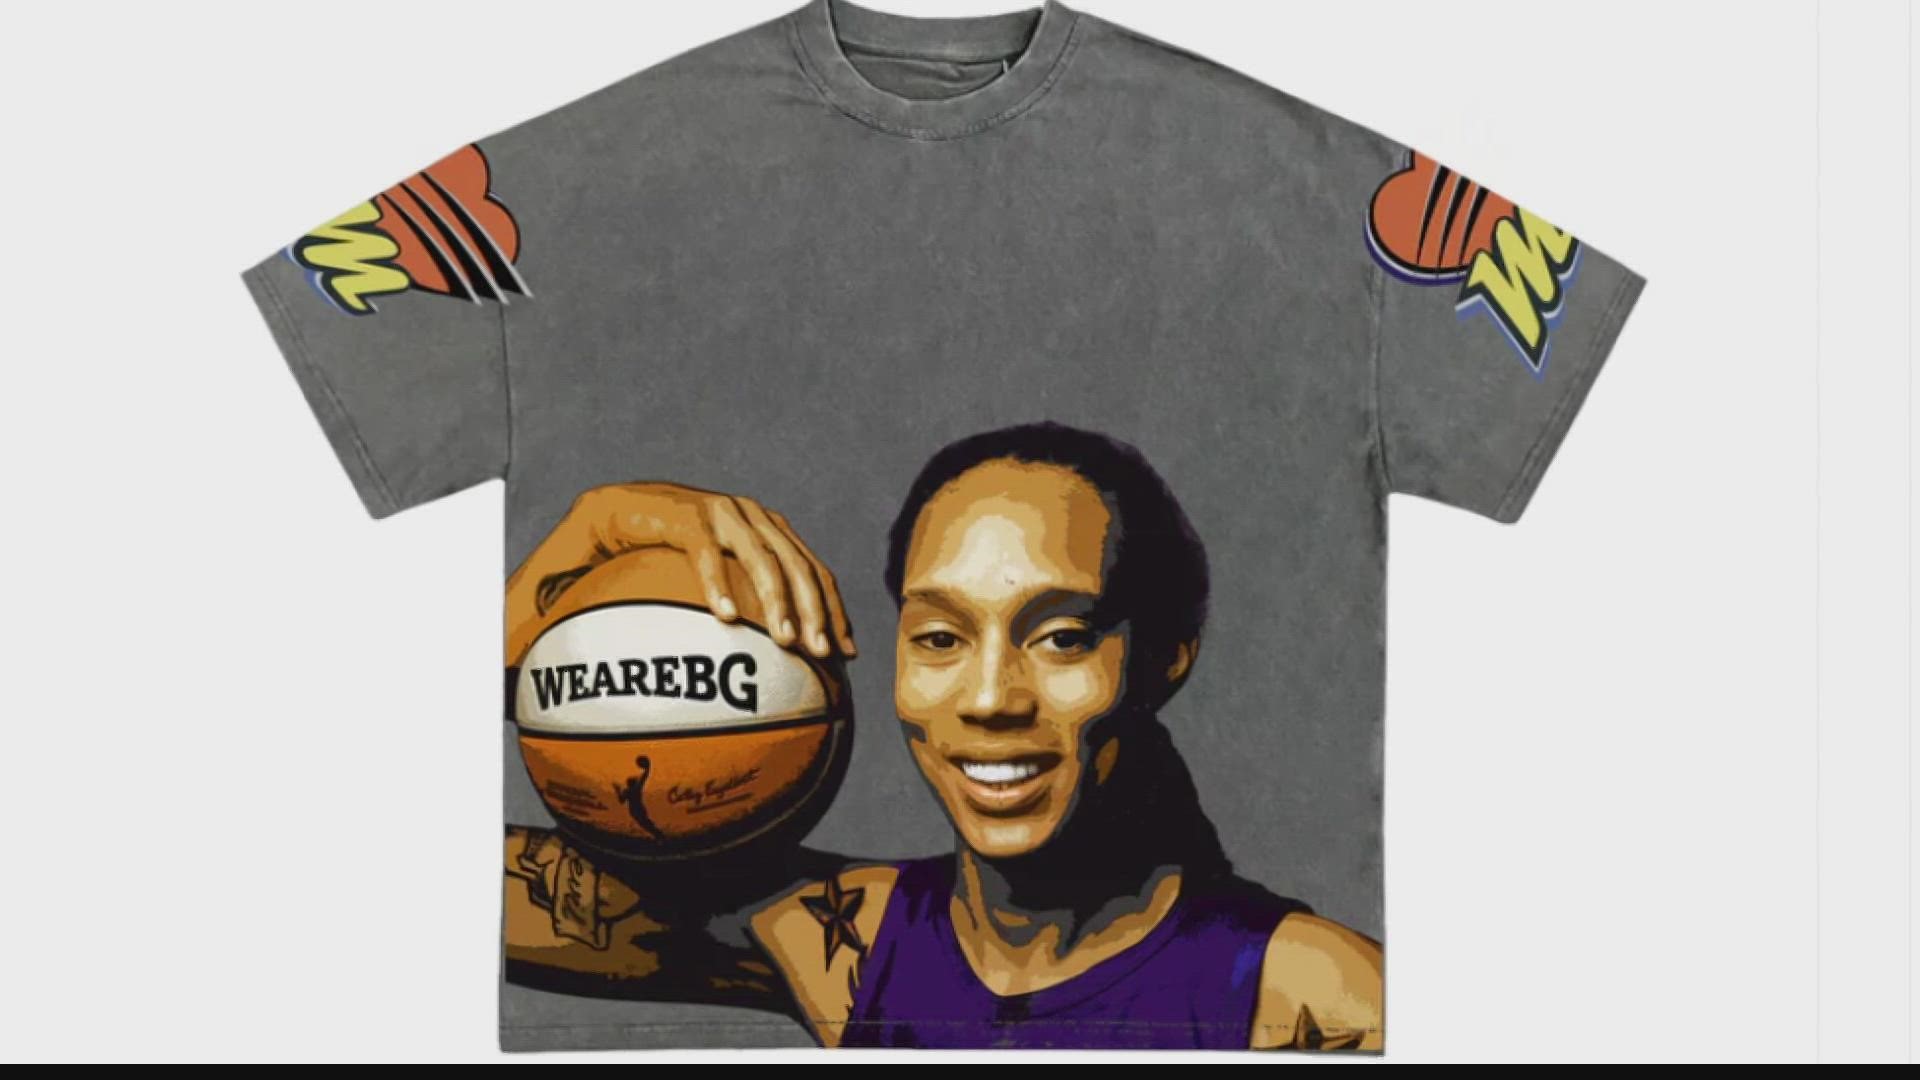 Brittney Griner-inspired clothing is popping up throughout the WNBA. A lot of "We are BG" shirts and hoodies are being worn. Meet the teen behind that design.